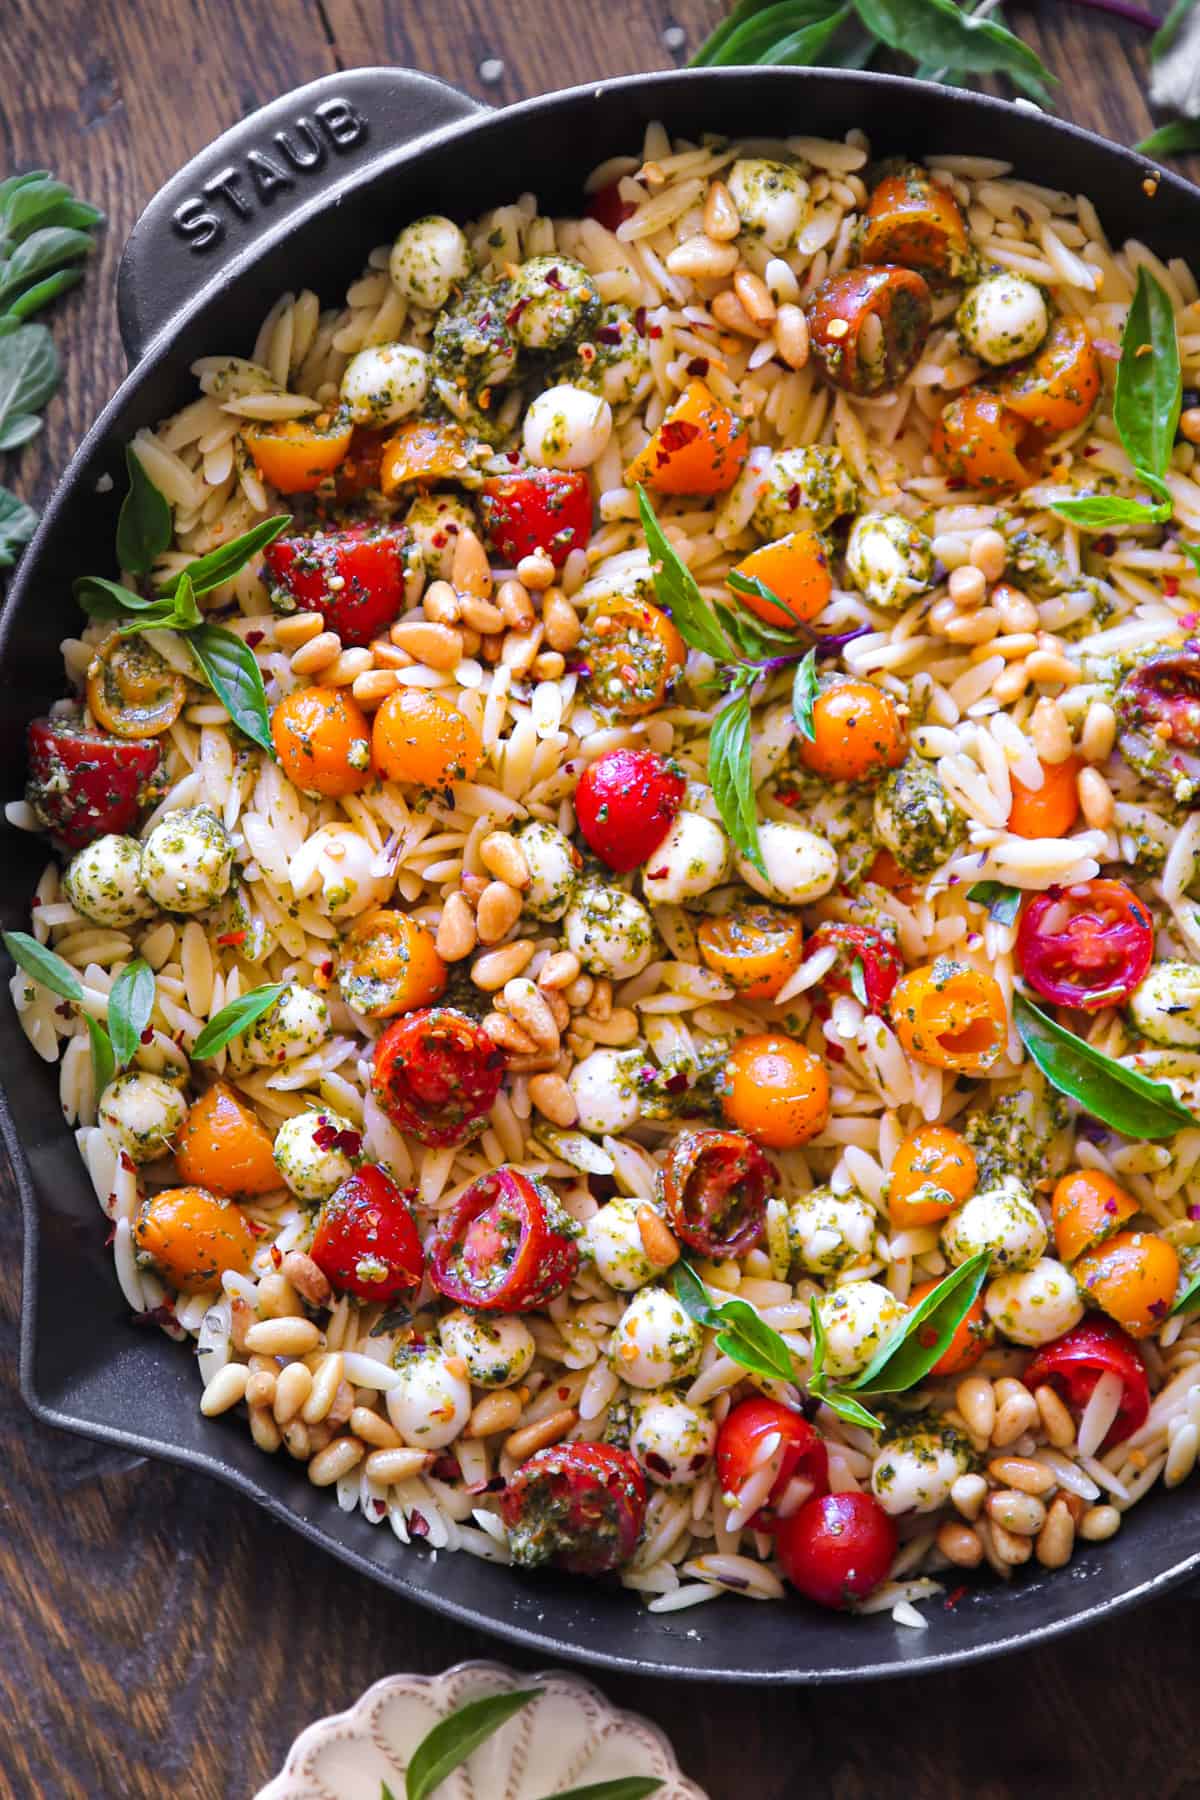 Pesto Orzo with Tomatoes, Mozzarella Cheese, and Pine Nuts - in a cast iron skillet.